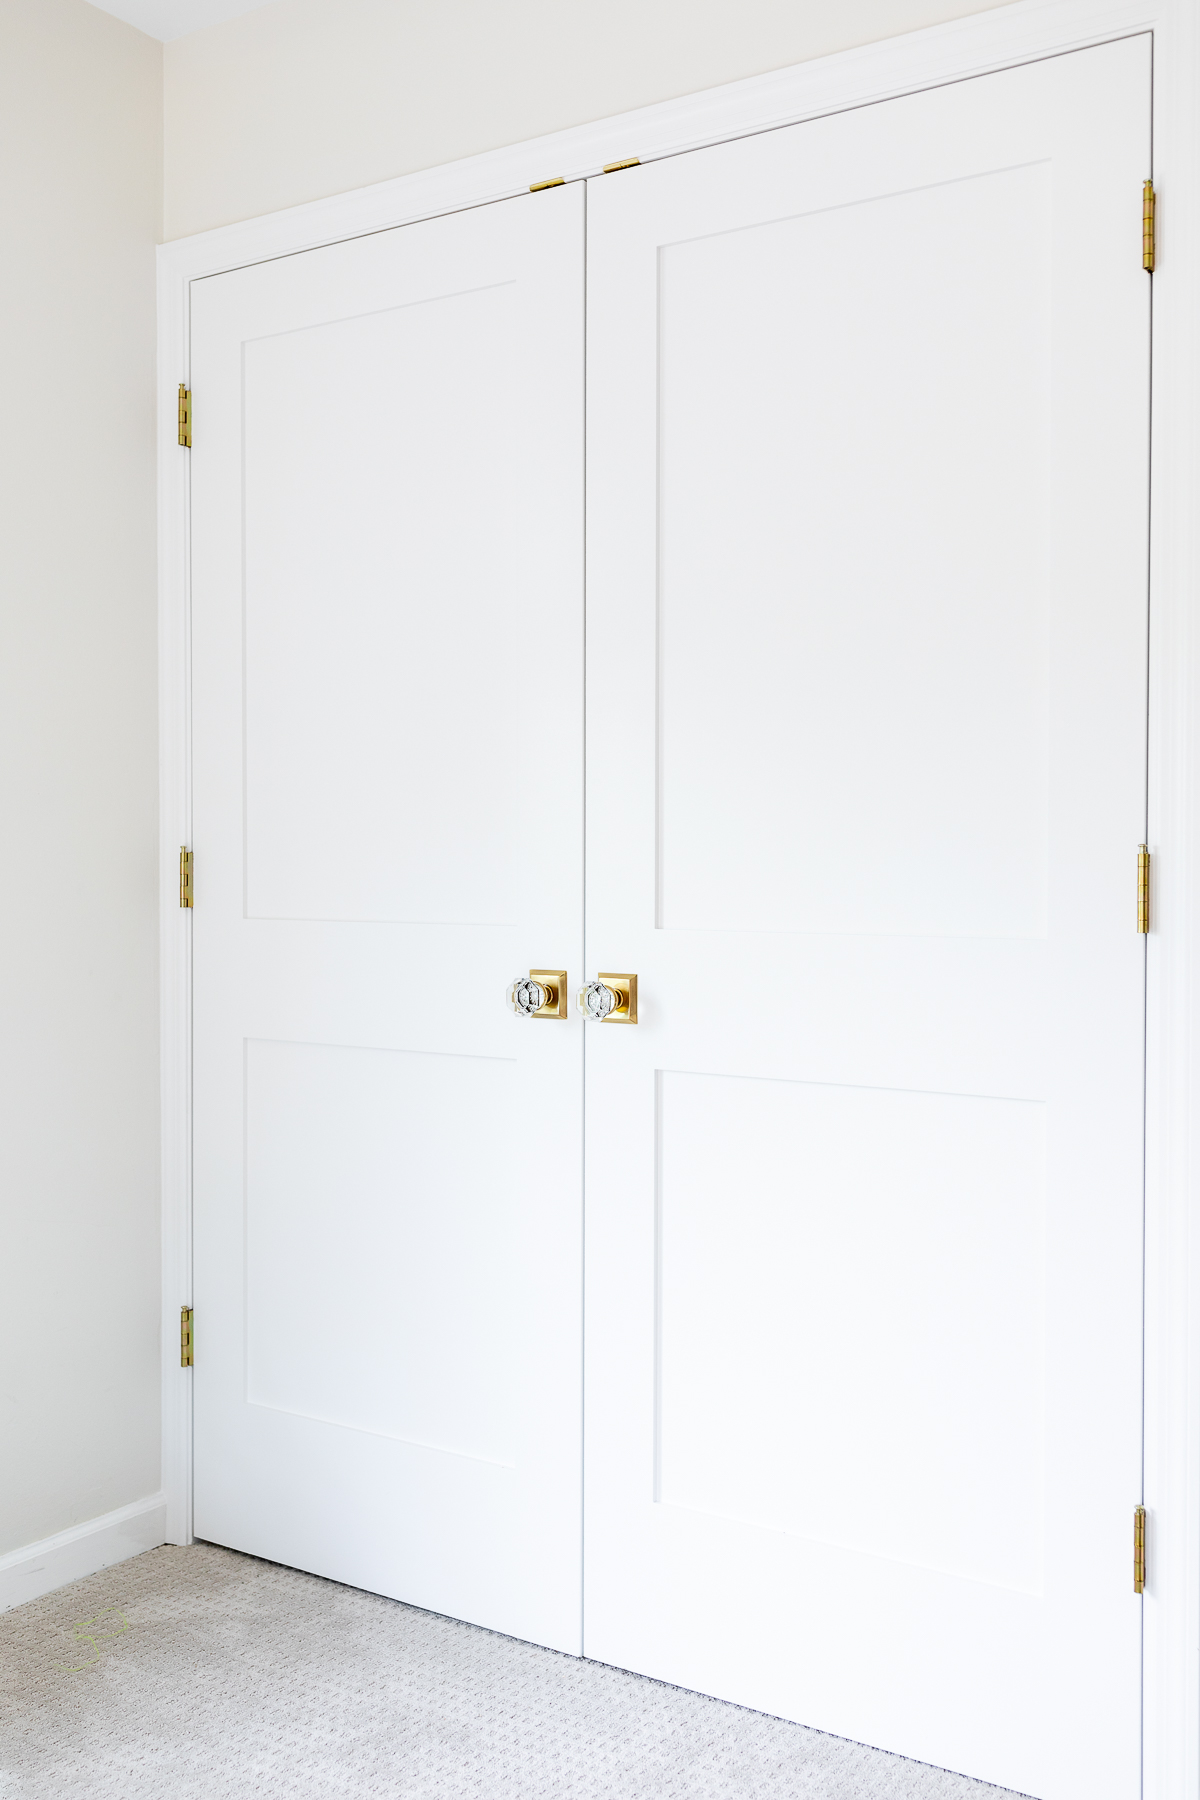 A pair of closed white double doors with gold handles, featuring a painting, in a room with light walls.